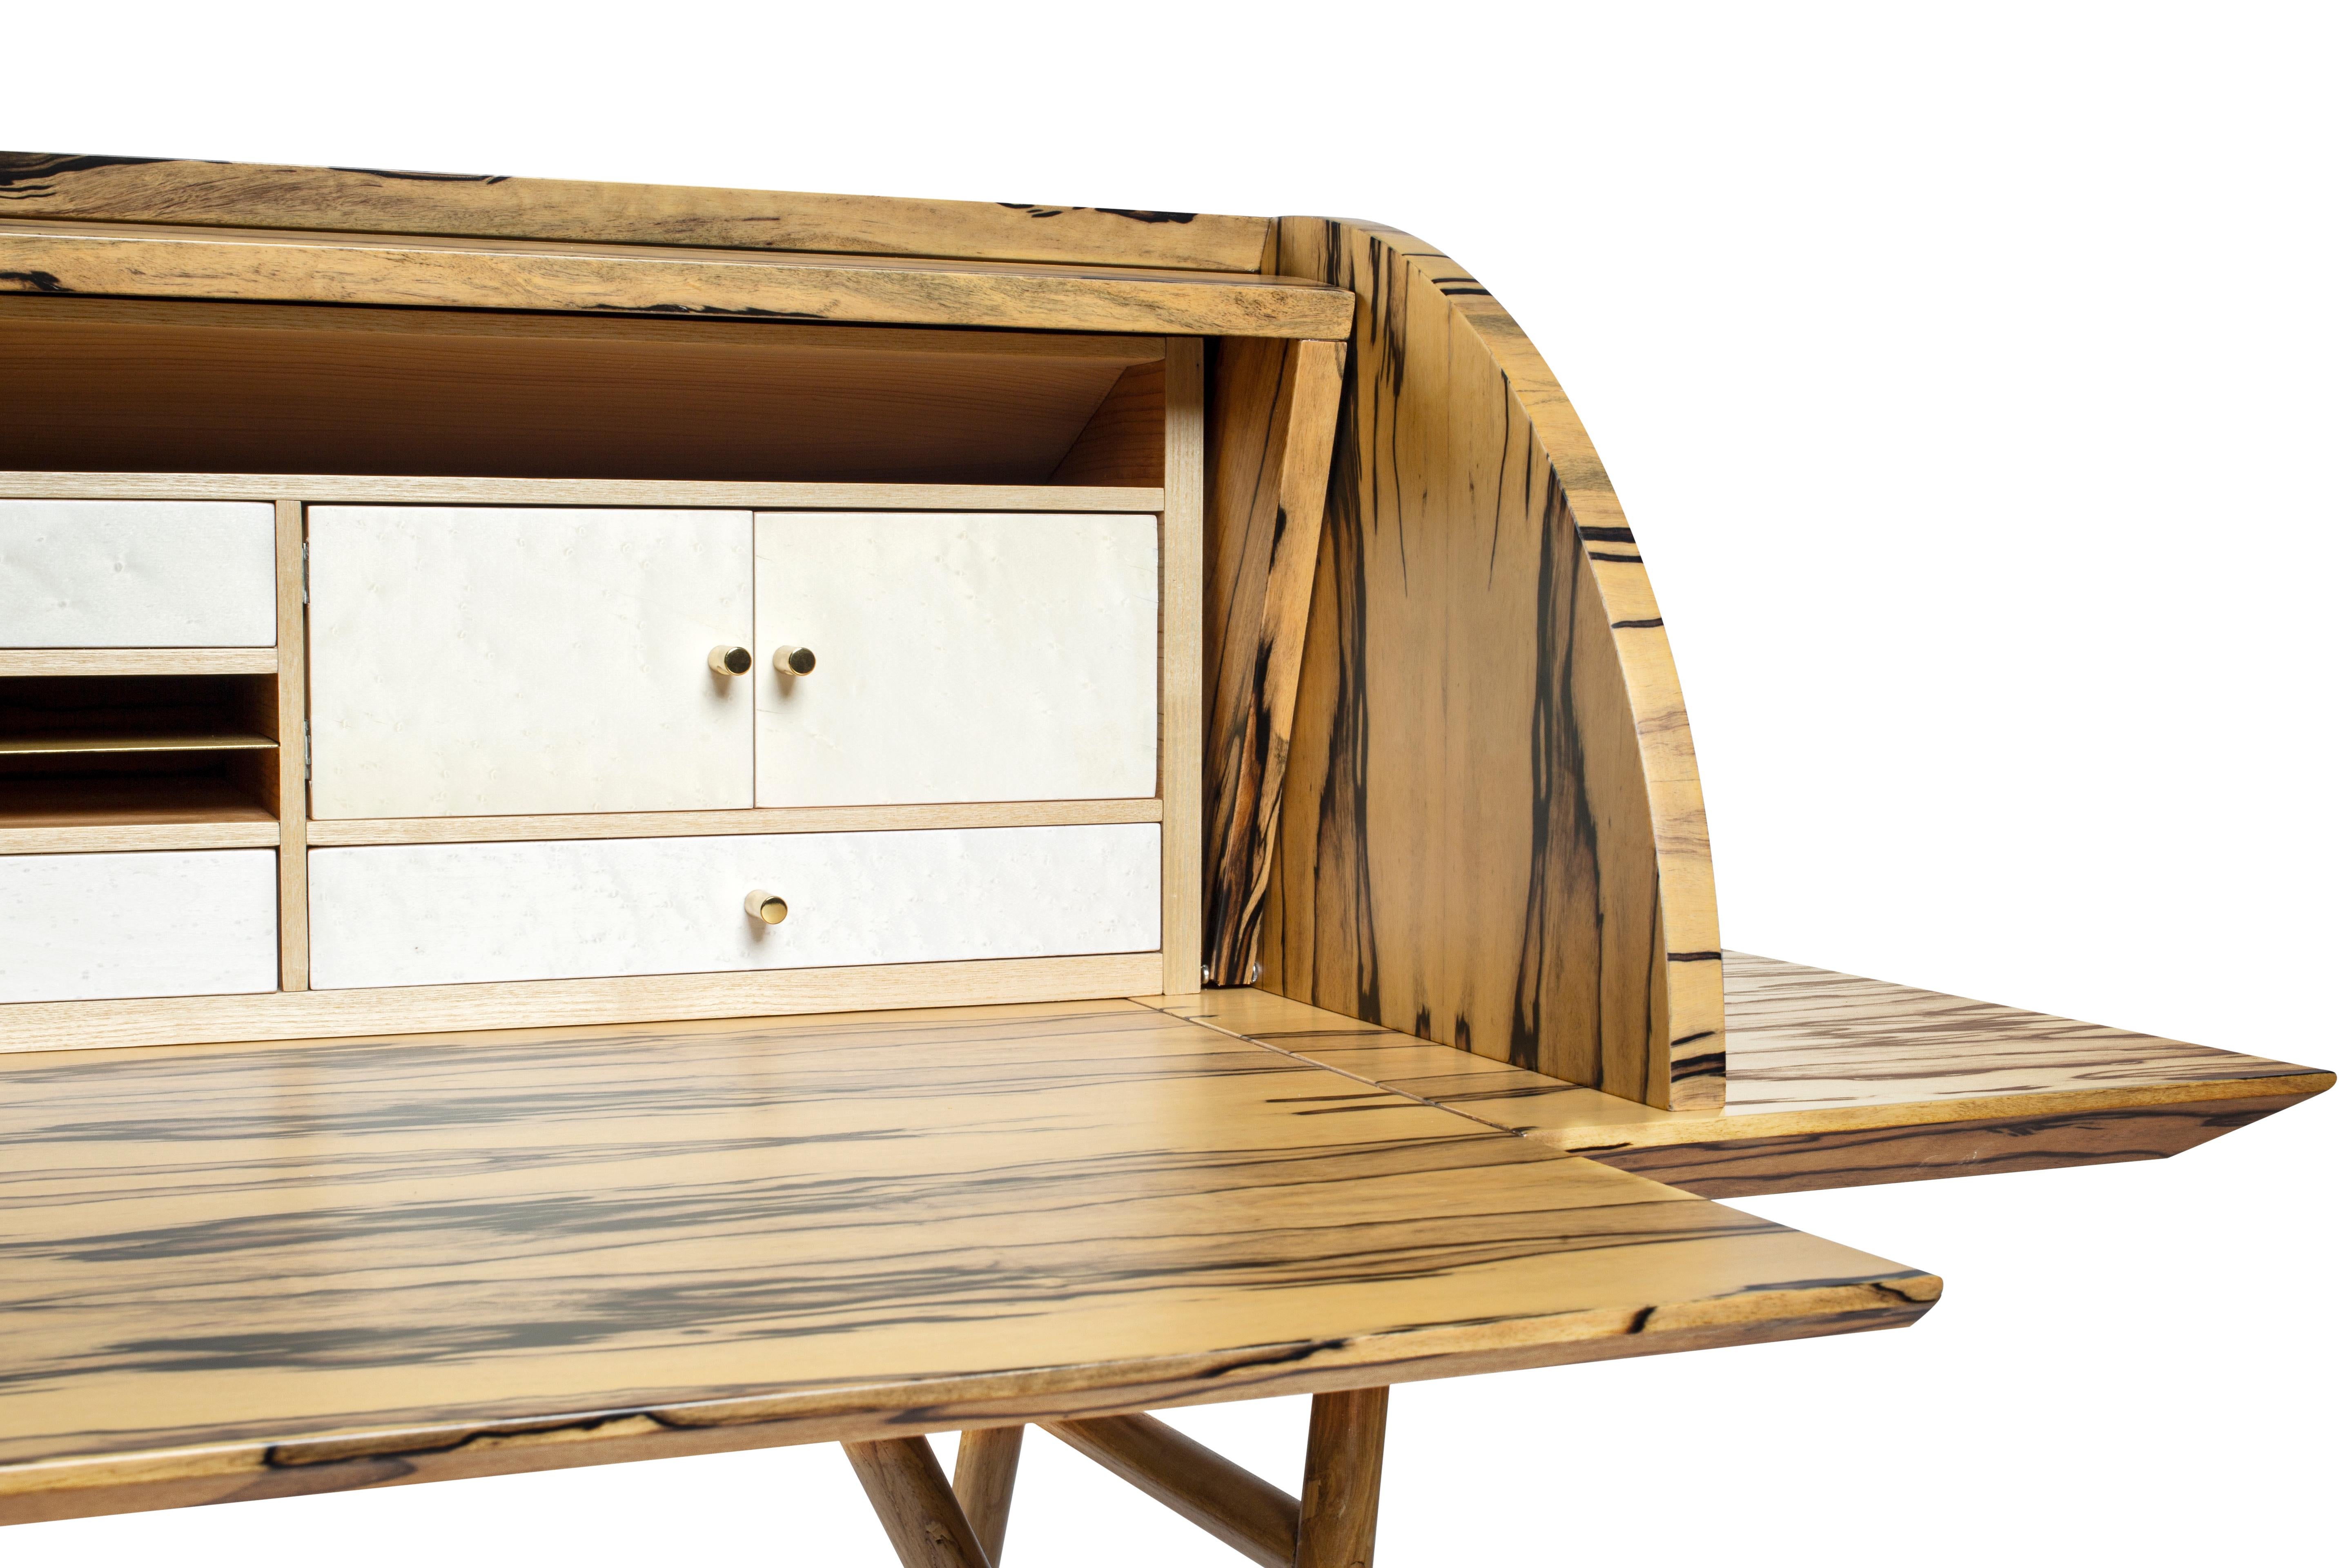 Contemporary 21st Century Charles Dix Desk, White Ebony, White Maple and Brass, Made in Italy For Sale